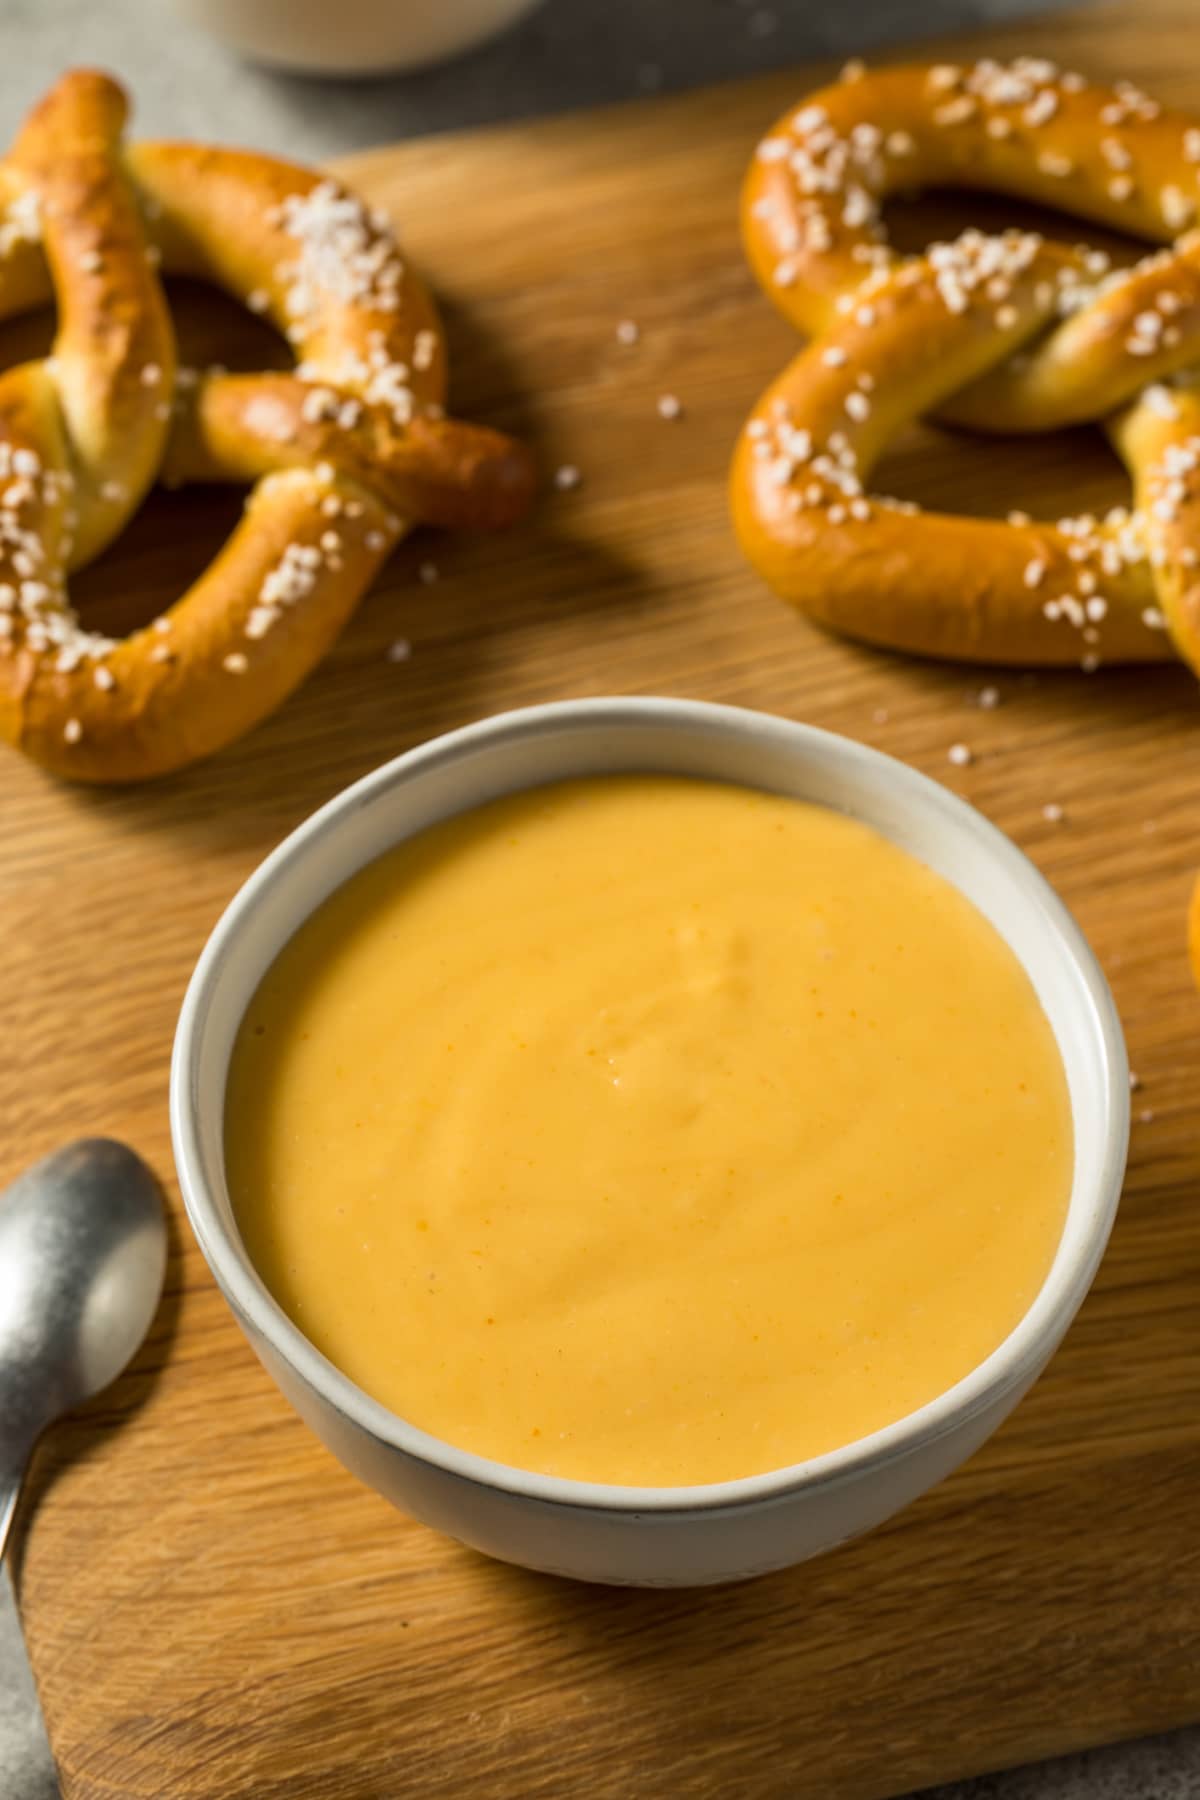 Homemade Beer Cheese Dip with Pretzels in a Bowl